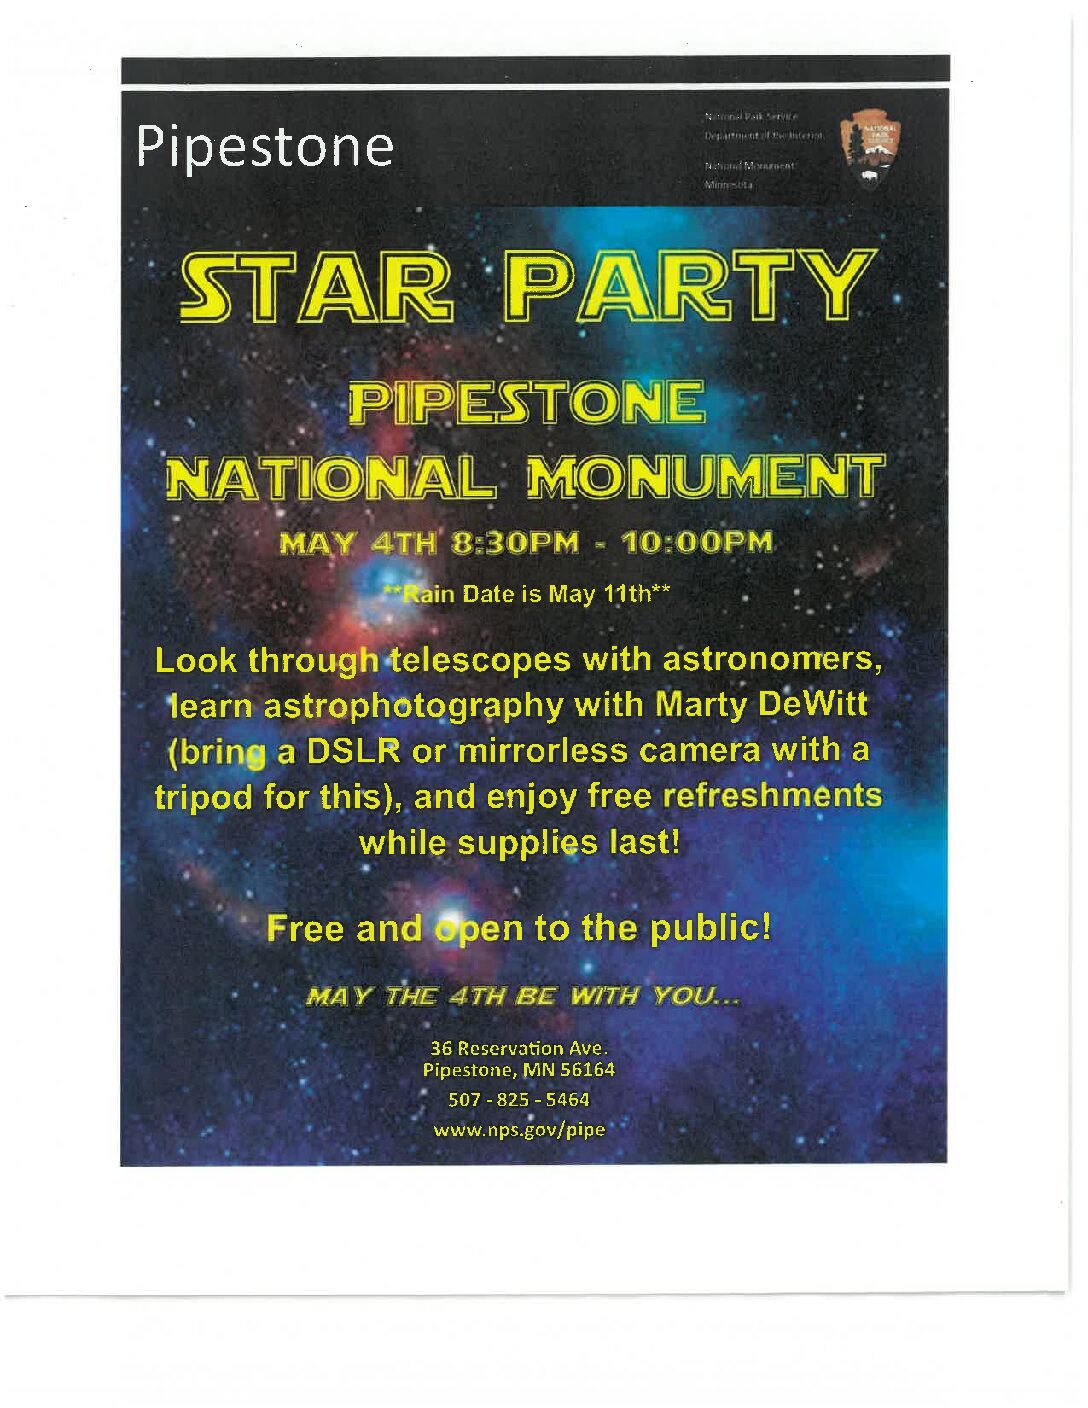 <h1 class="tribe-events-single-event-title">Star Party</h1>